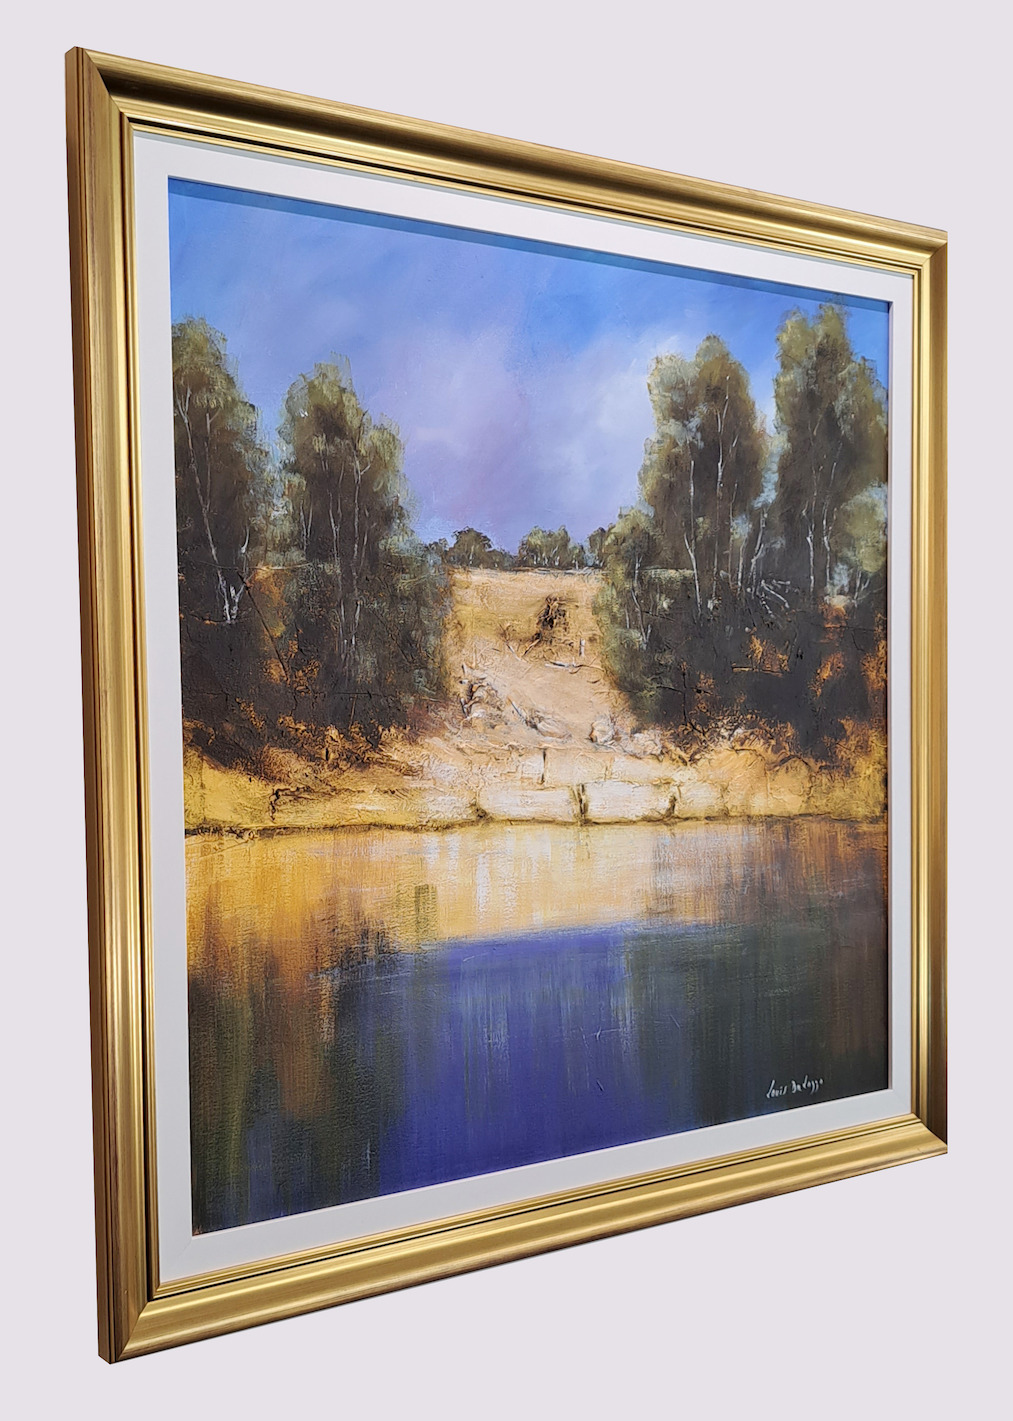 Framed Side View Of Landscape Painting "Reflections in Carnarvon Creek" By Louis Dalozzo